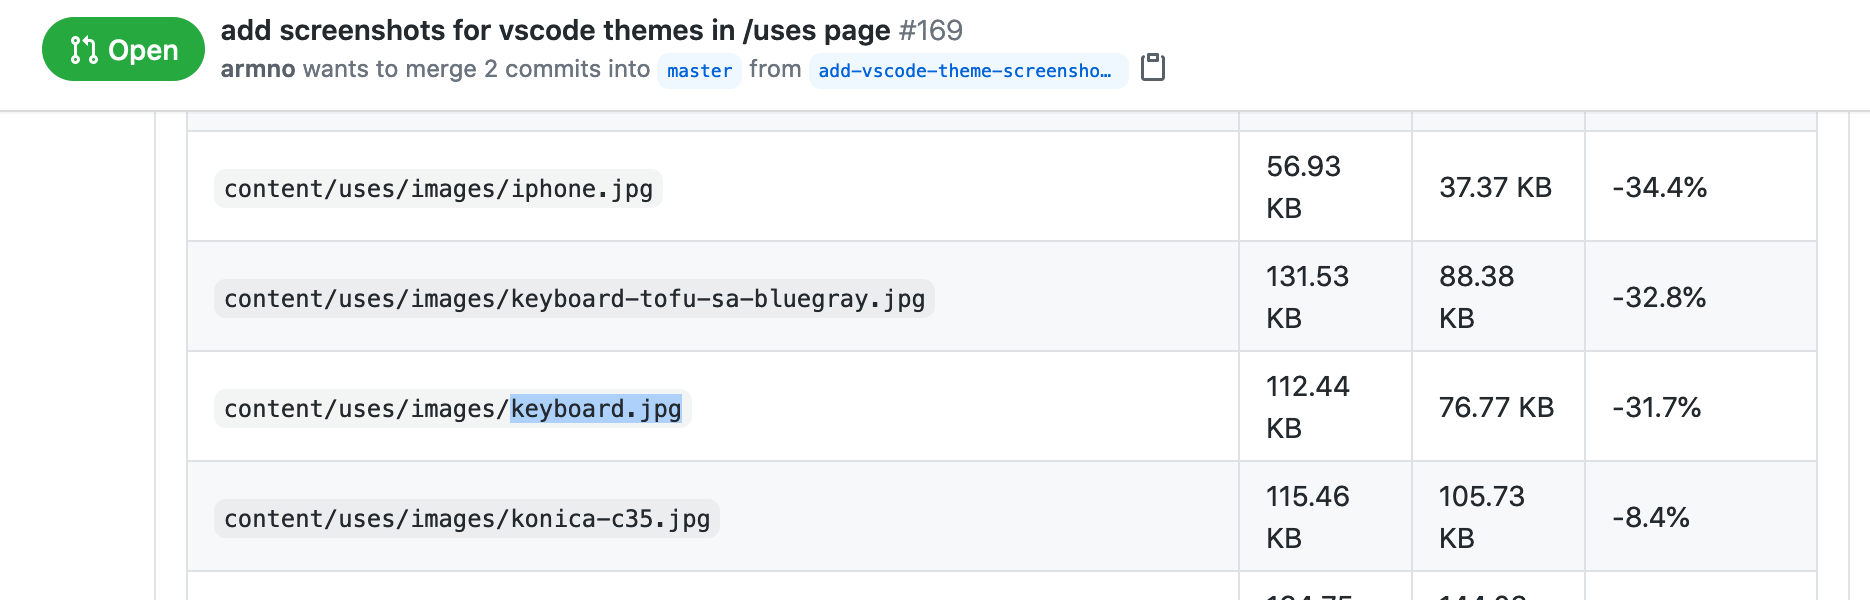 Results of image optimization is added into the pull request